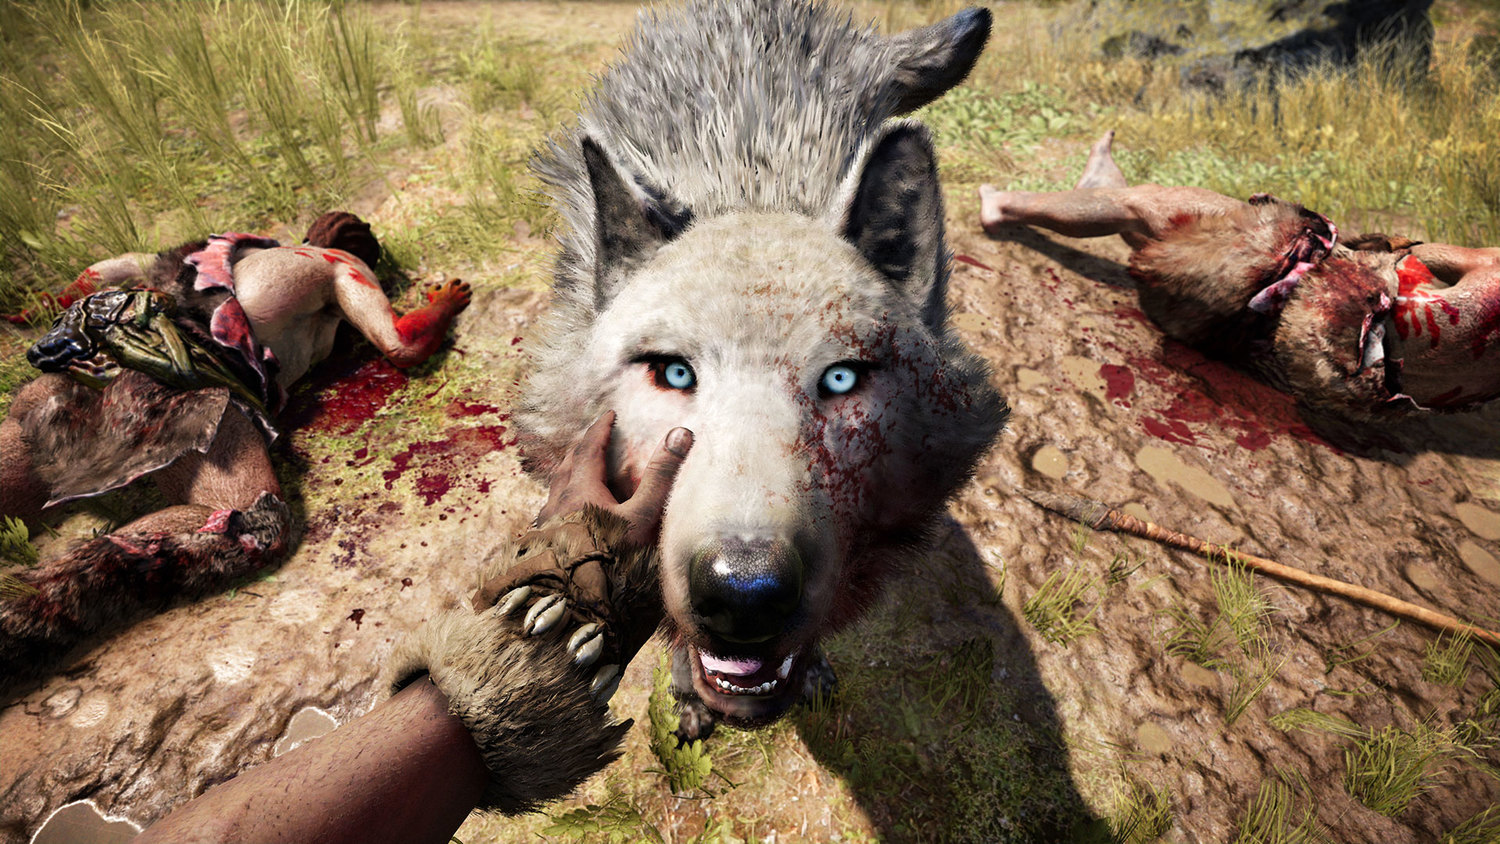 New FAR CRY PRIMAL 101 Trailer Shows The Brutality of The Stone Age.